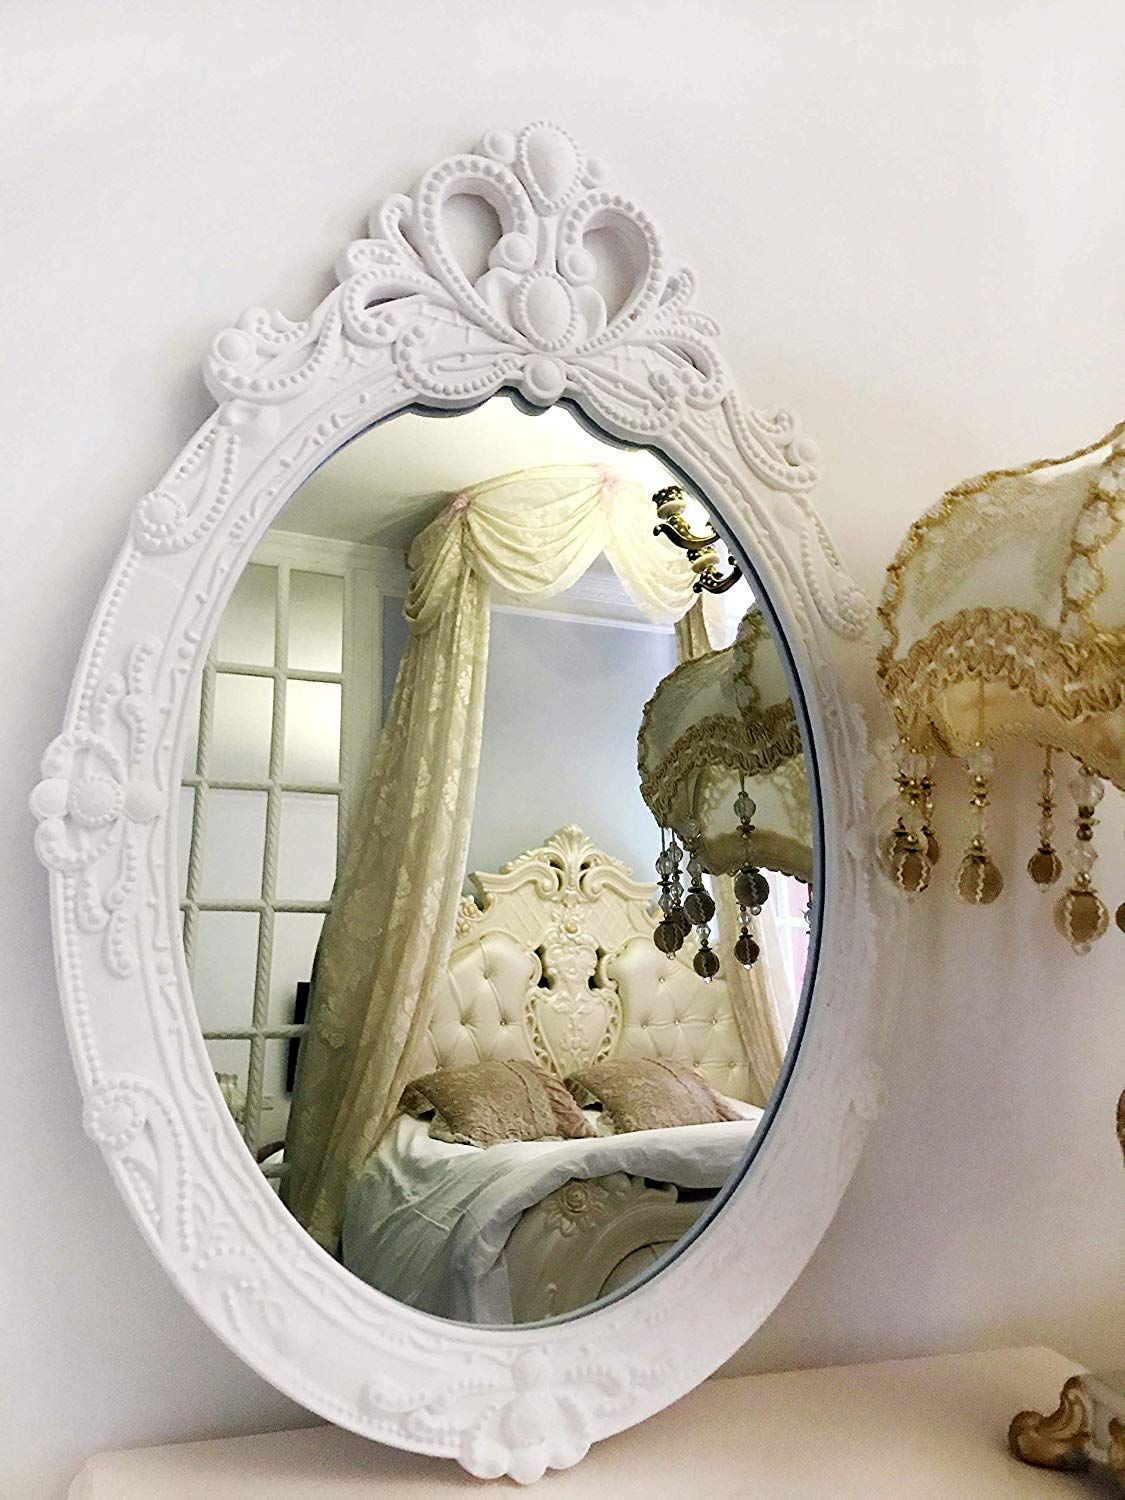 Amazon: Basswood Hunters Oval Vintage Decorative Wall Mirror, White Within White Wood Wall Mirrors (View 14 of 15)